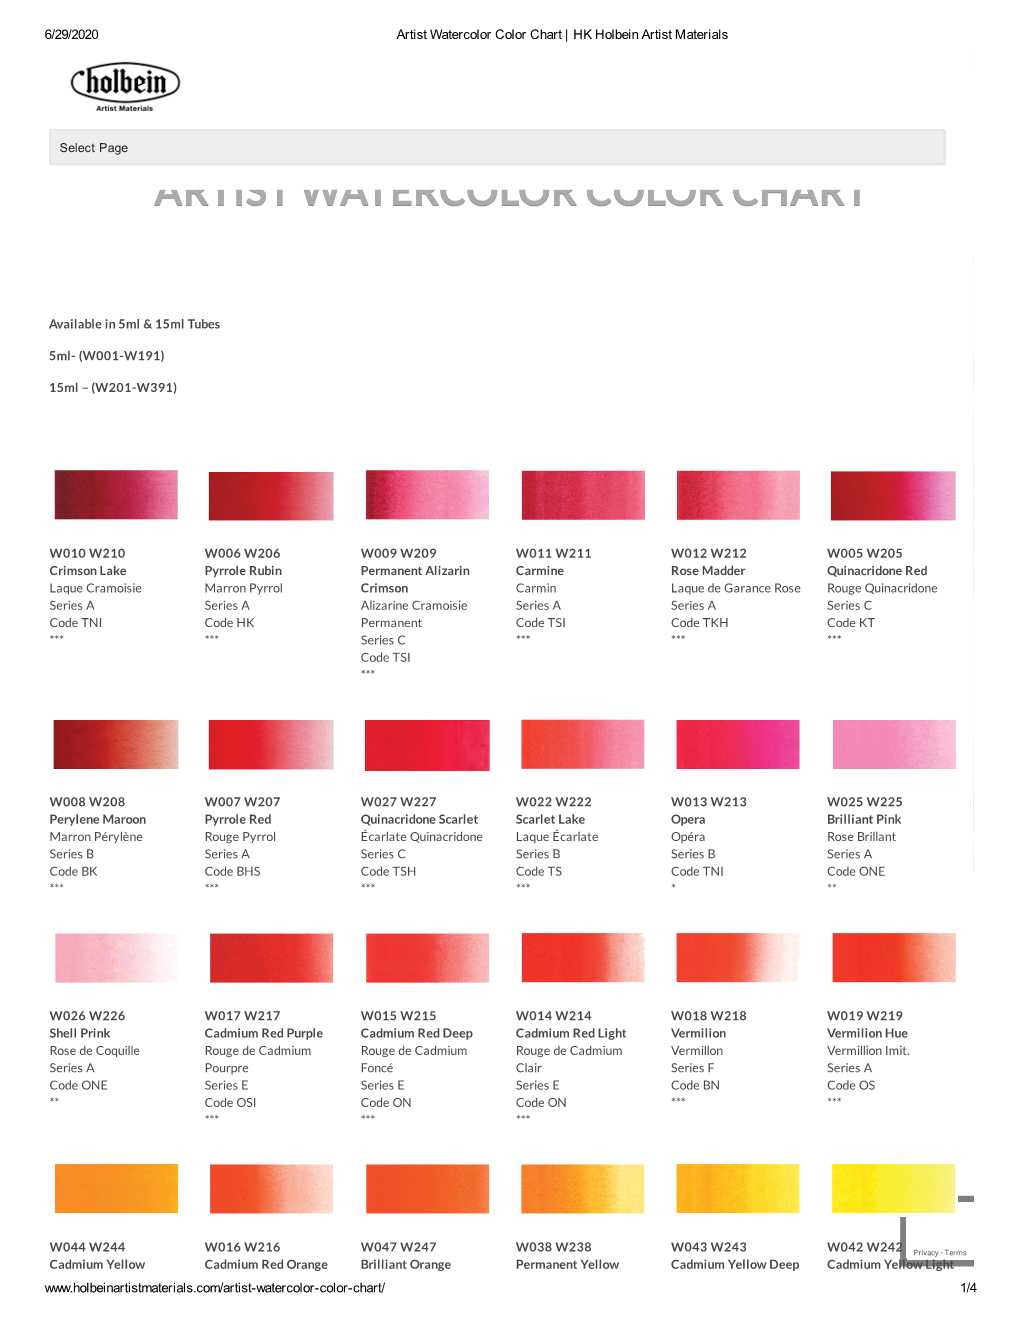 Artist Watercolor Color Chart | HK Holbein Artist Materials